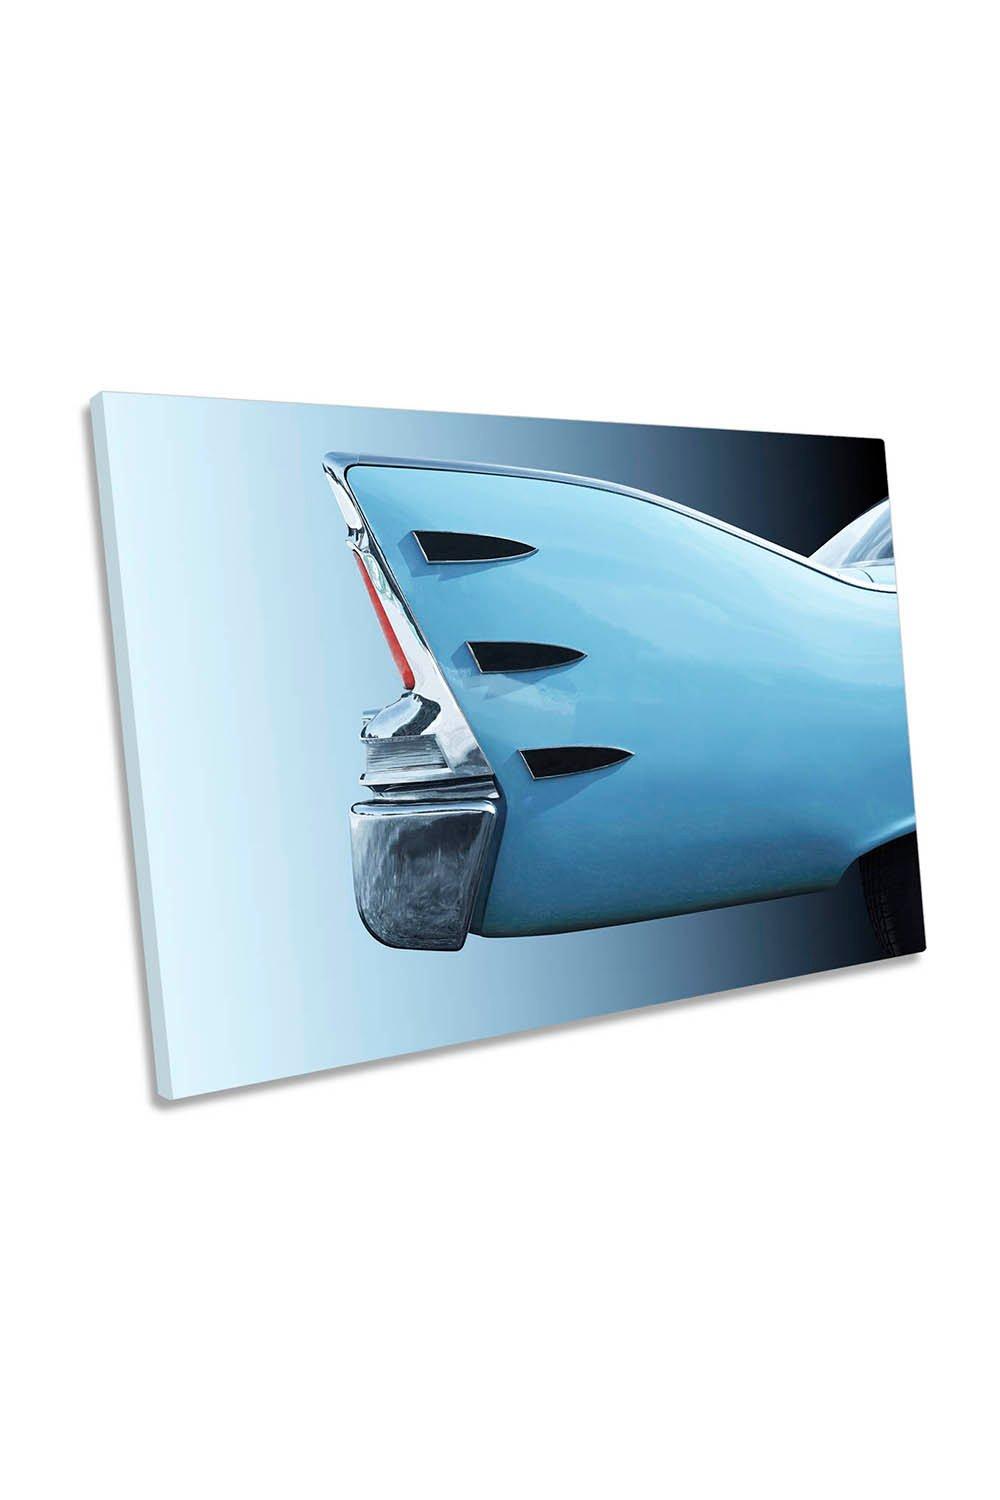 American Classic Car Belvedere 1960 Tail Fin Canvas Wall Art Picture Print